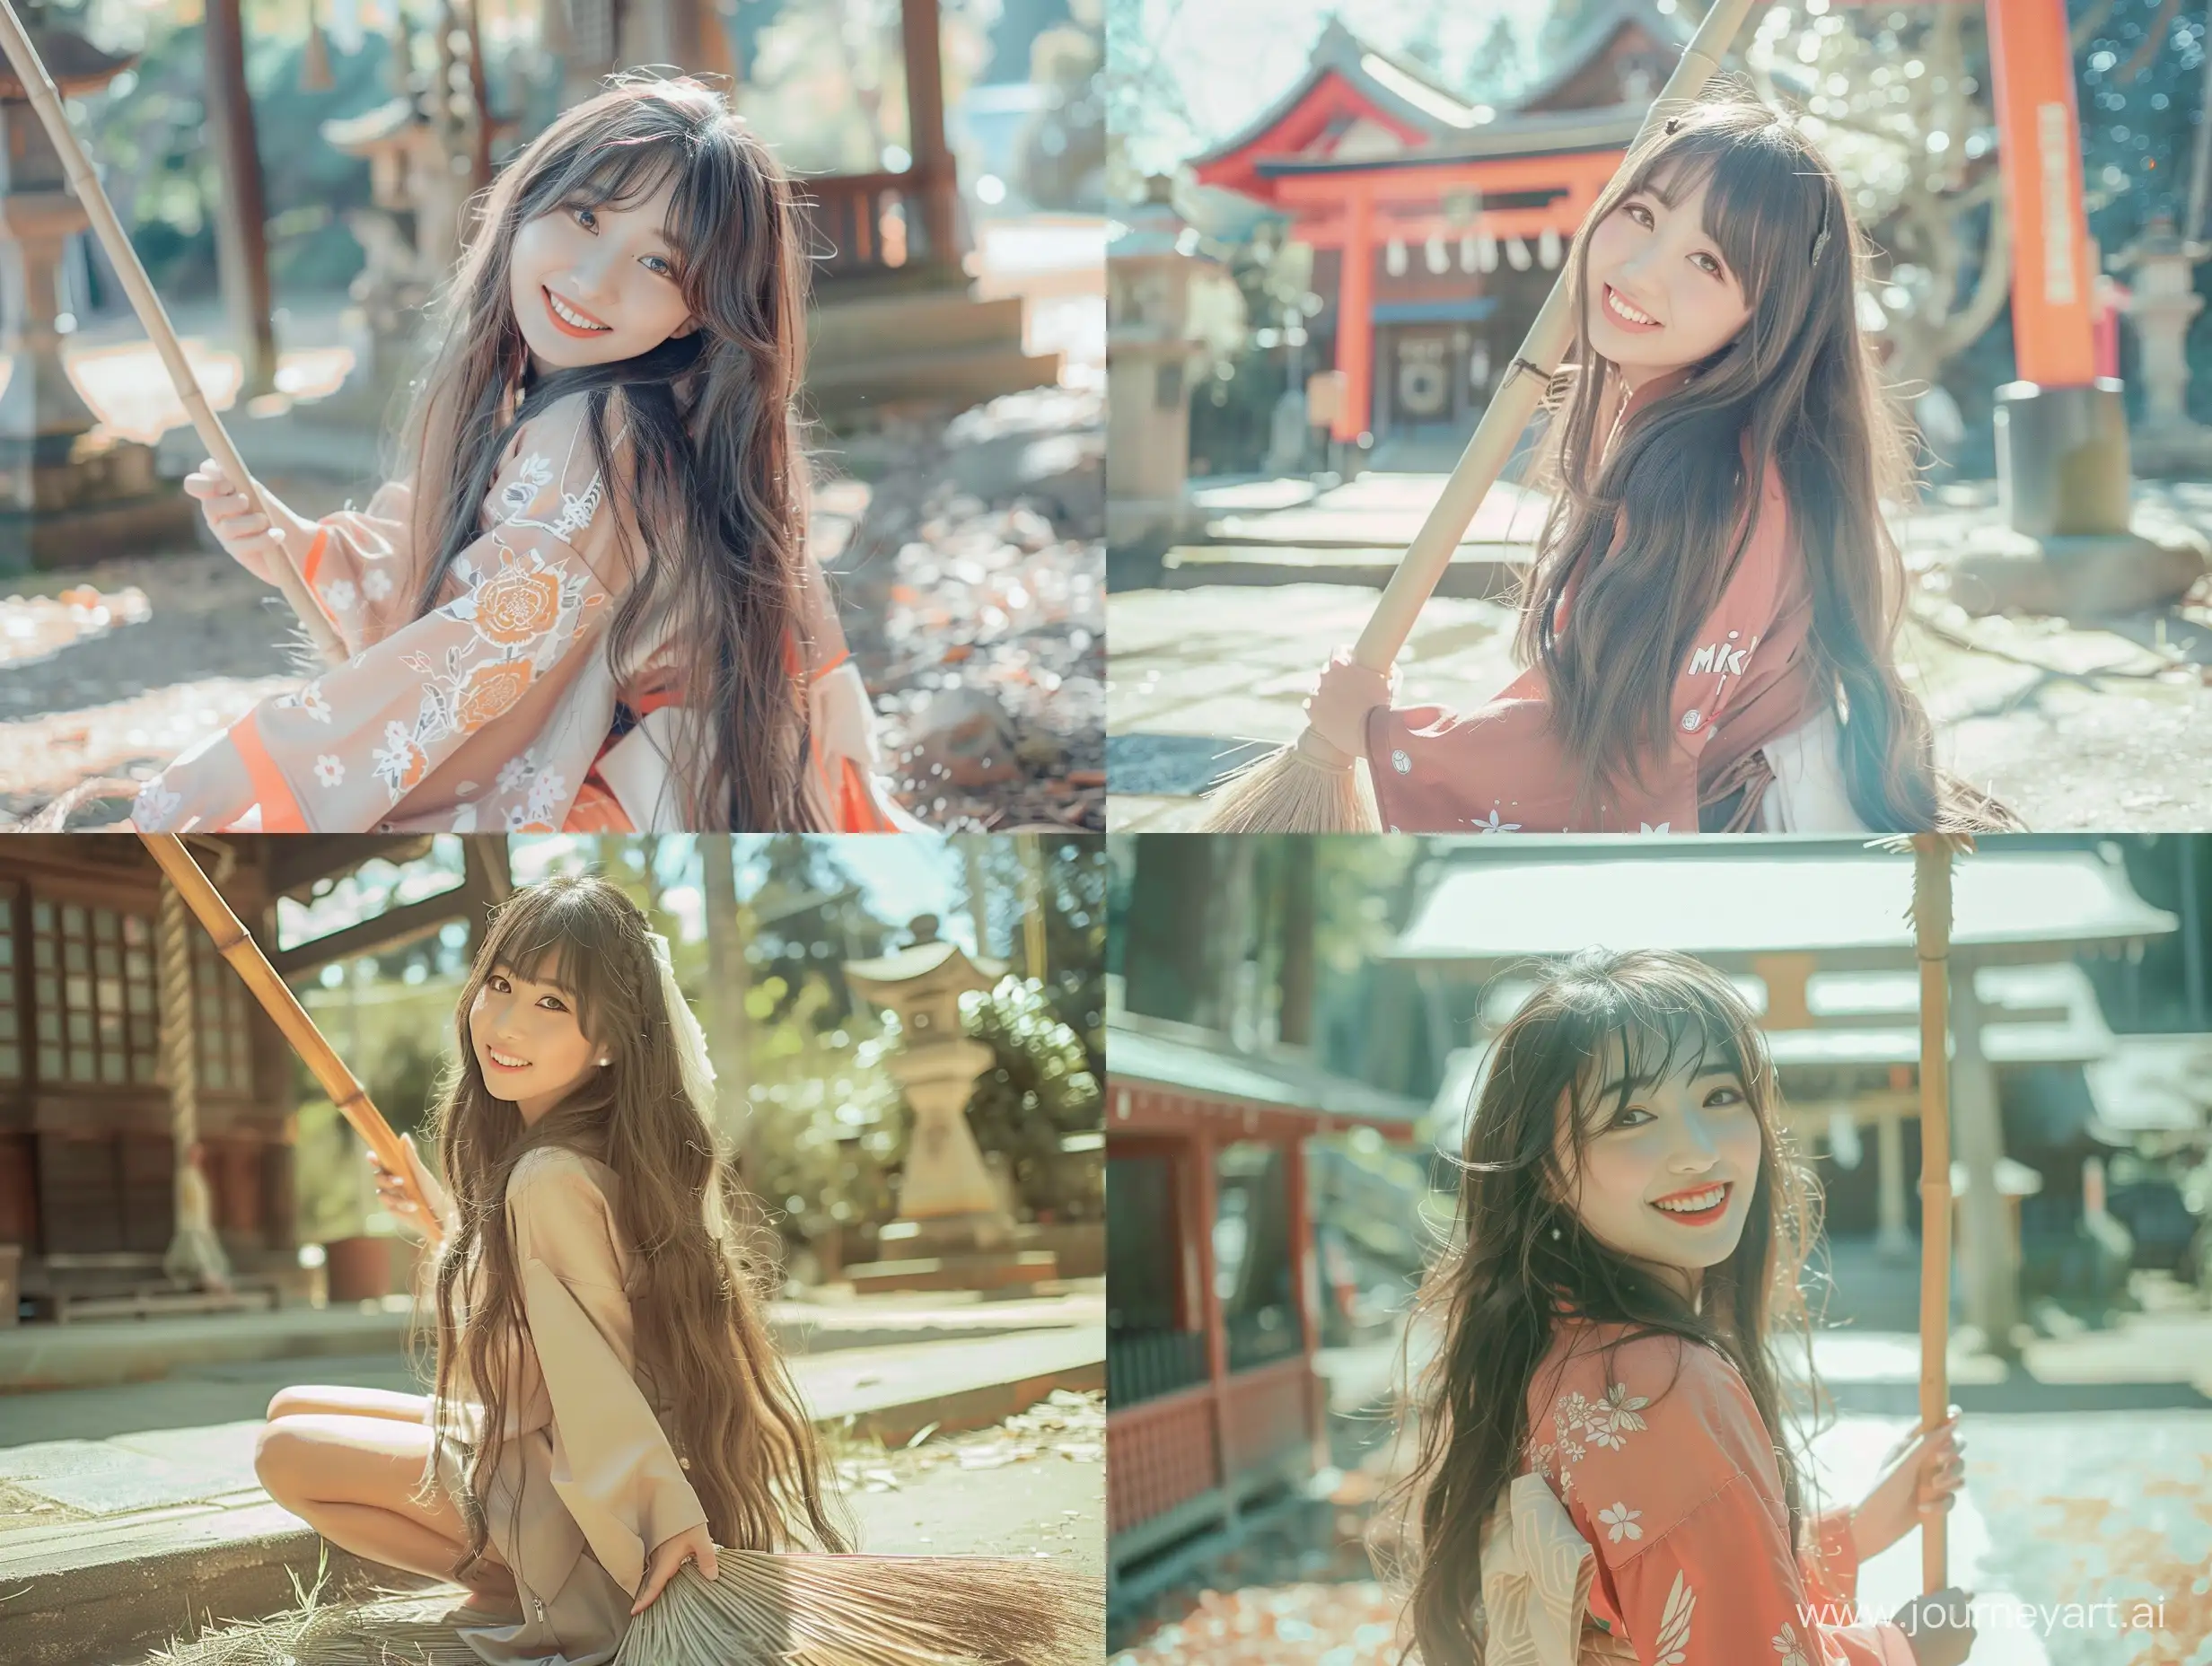 Create an image that shows a cute 23 year old Japanese Girl with long hair, sweet smile, full shot, full body, from an old photo album from the 80s, captured at a low angle with a movie camera aesthetic, wearing Miko's costume, outside a shrine outdoors , posing cutely with a broom in different photo poses, showing a real-life perspective and recalling the nostalgic atmosphere of film photography. Emphasize soft natural light, clear lighting, and slightly increase graininess to enhance the timeless and lively feel of this moment. Realistic, cinematic, stunningly beautiful girls